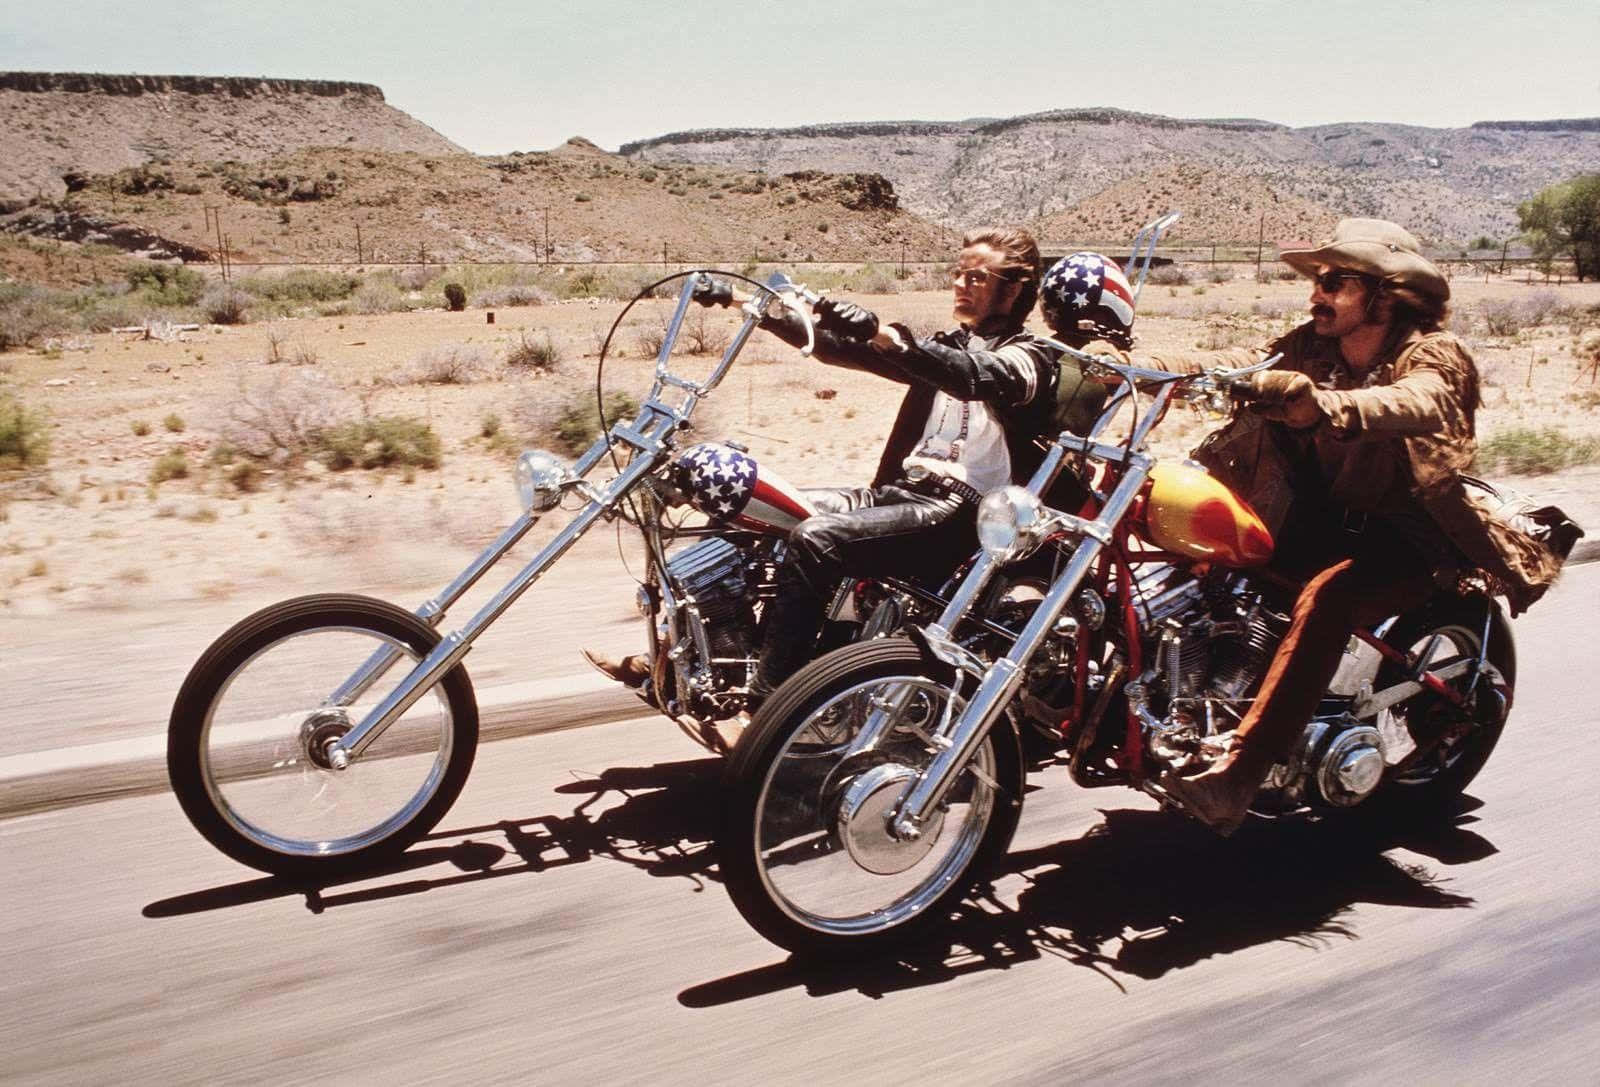 Two Men Riding Motorcycles Down A Desert Road